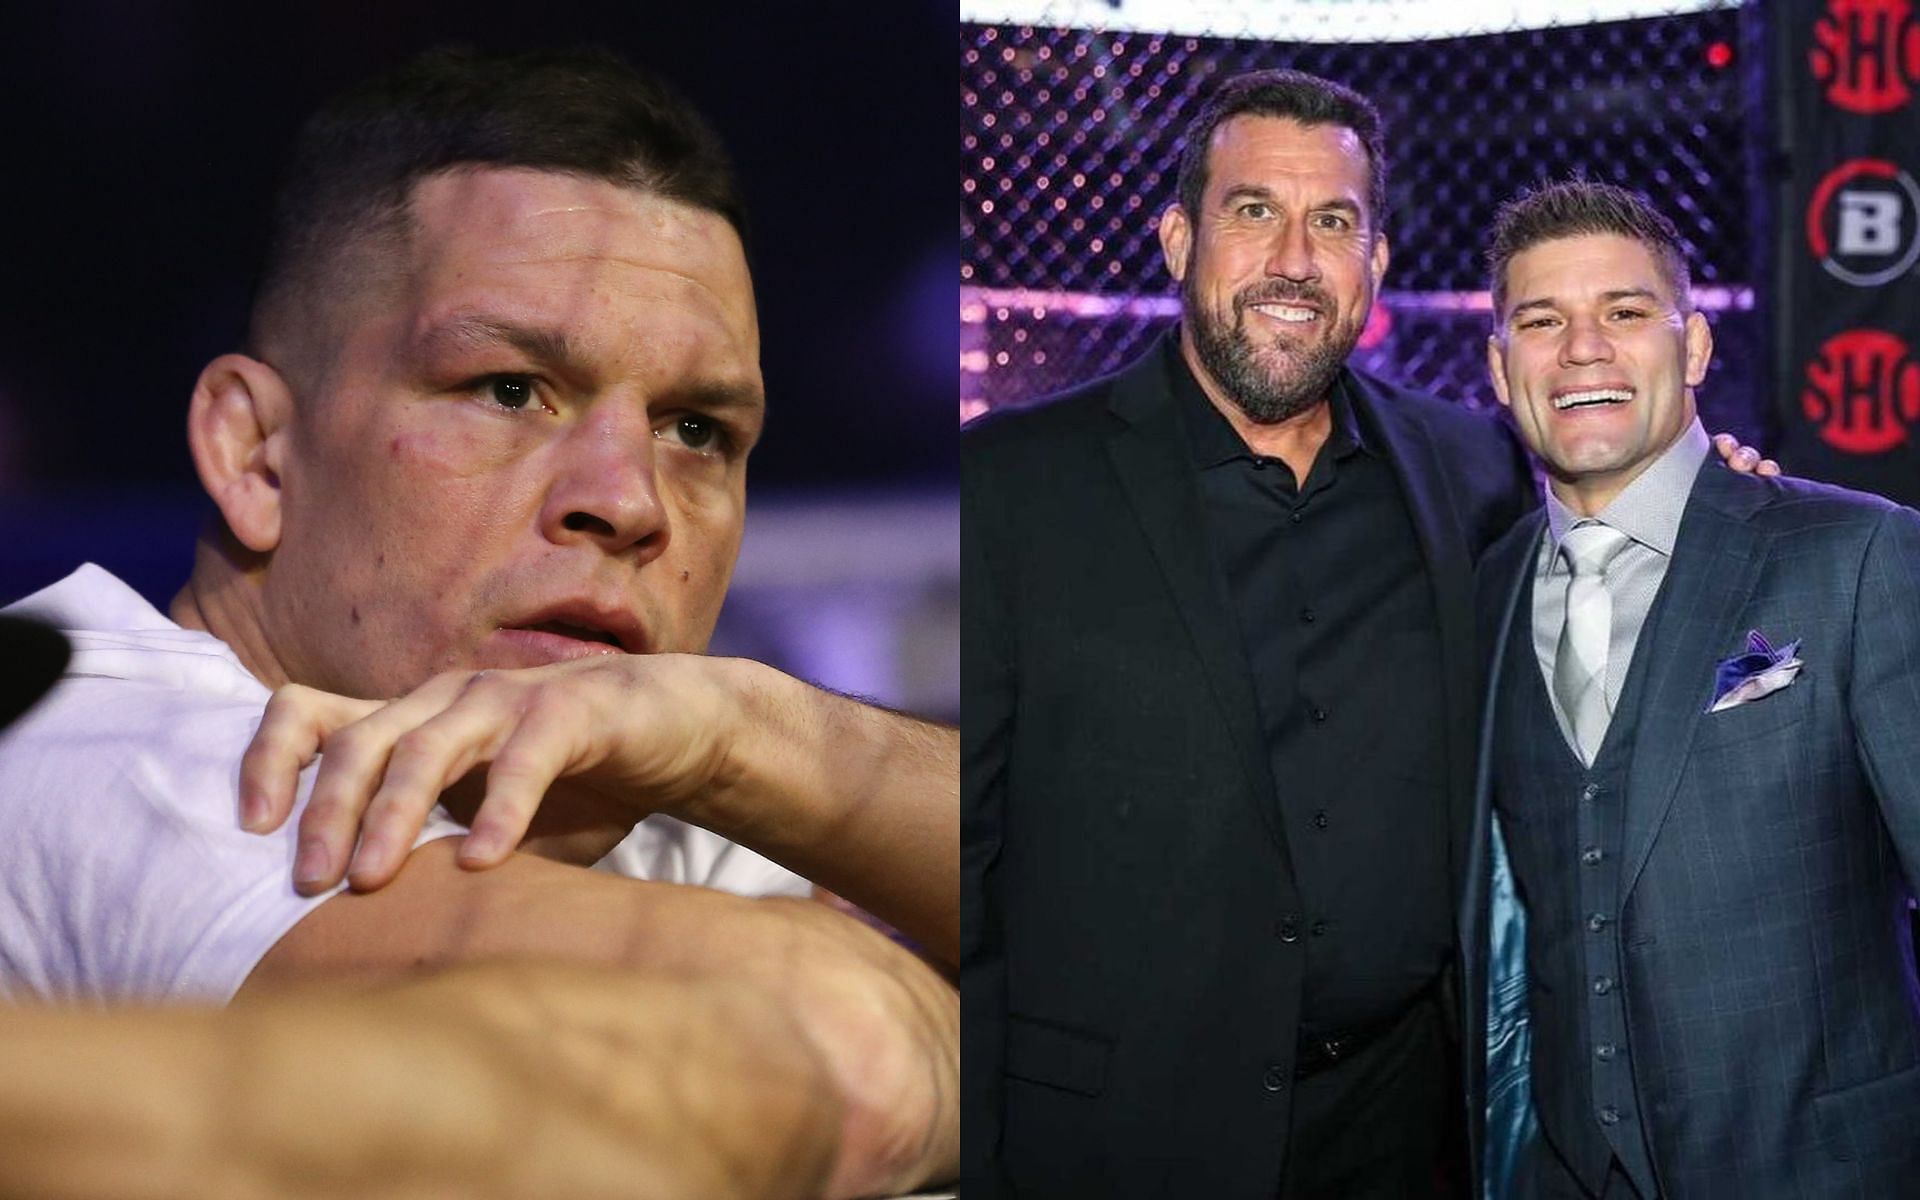 Nate Diaz (Left), McCarthy and Thomson (Right) [Image courtesy: Getty Images and @therealpunk Instagram]